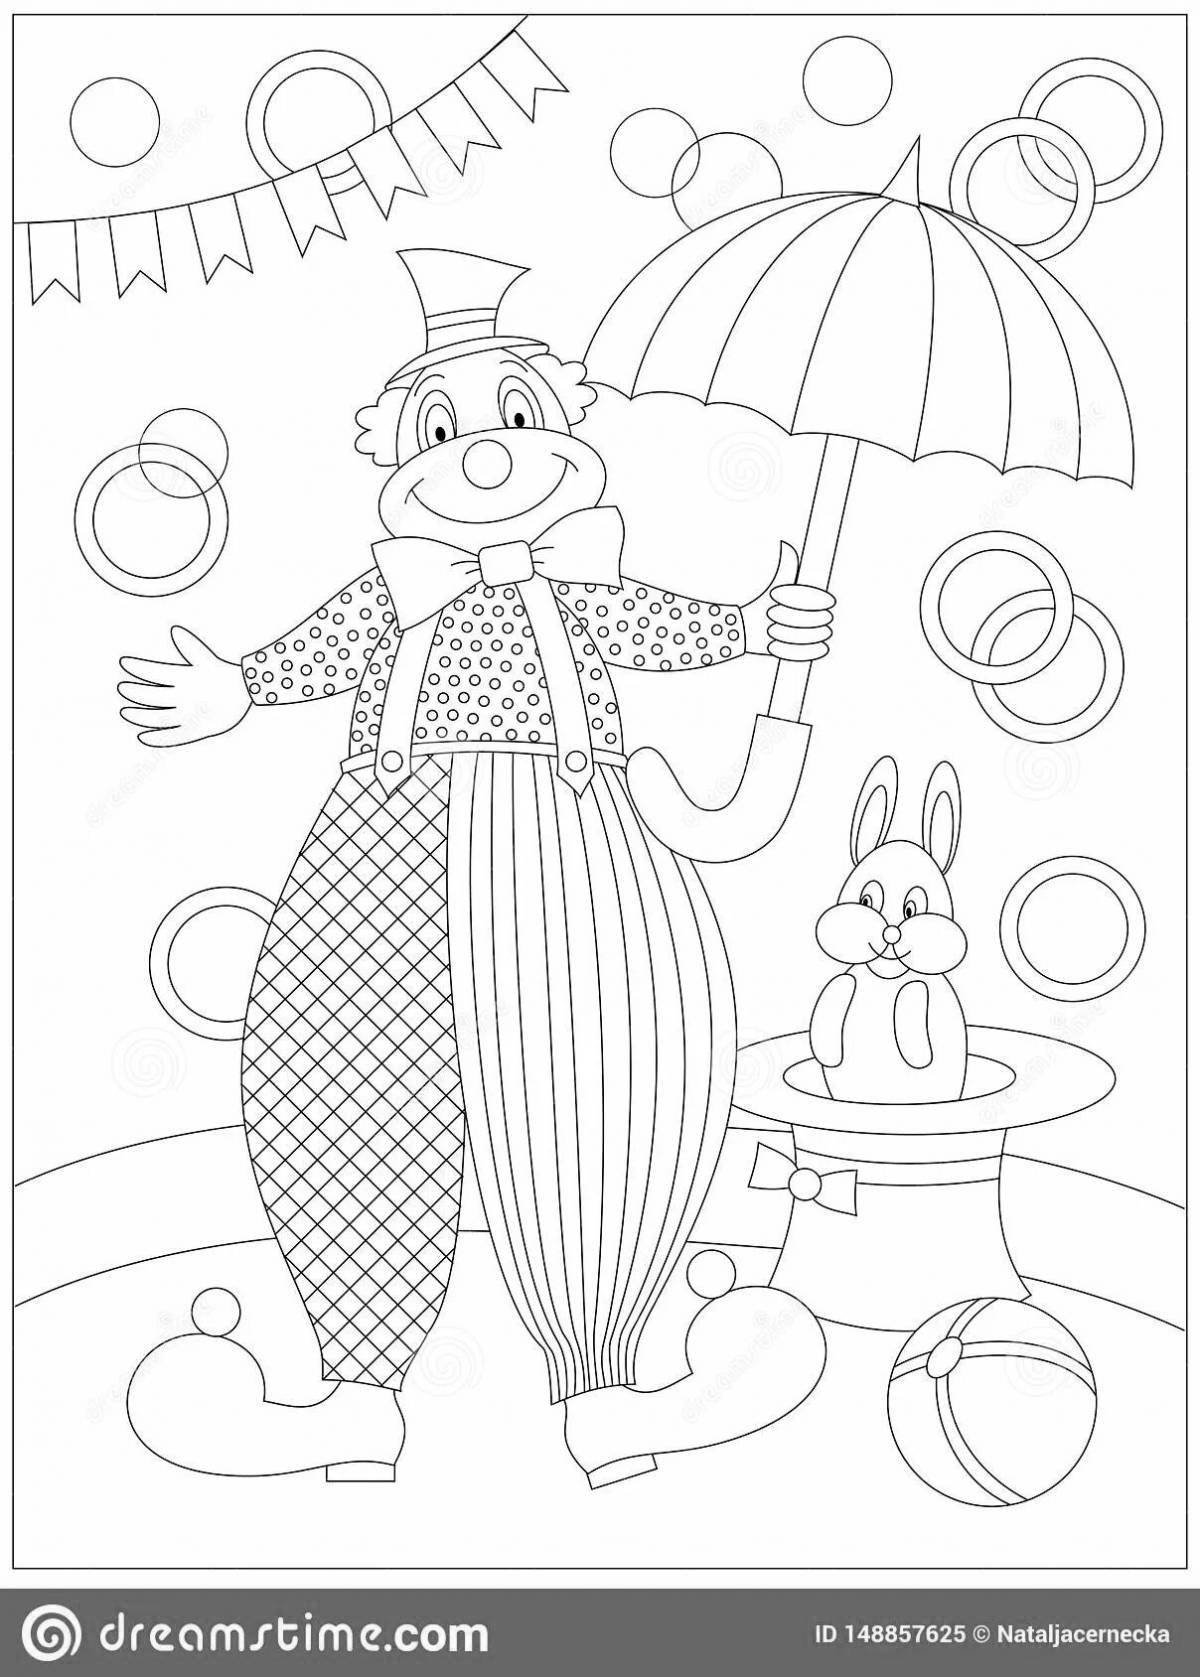 A funny coloring page visiting a clown